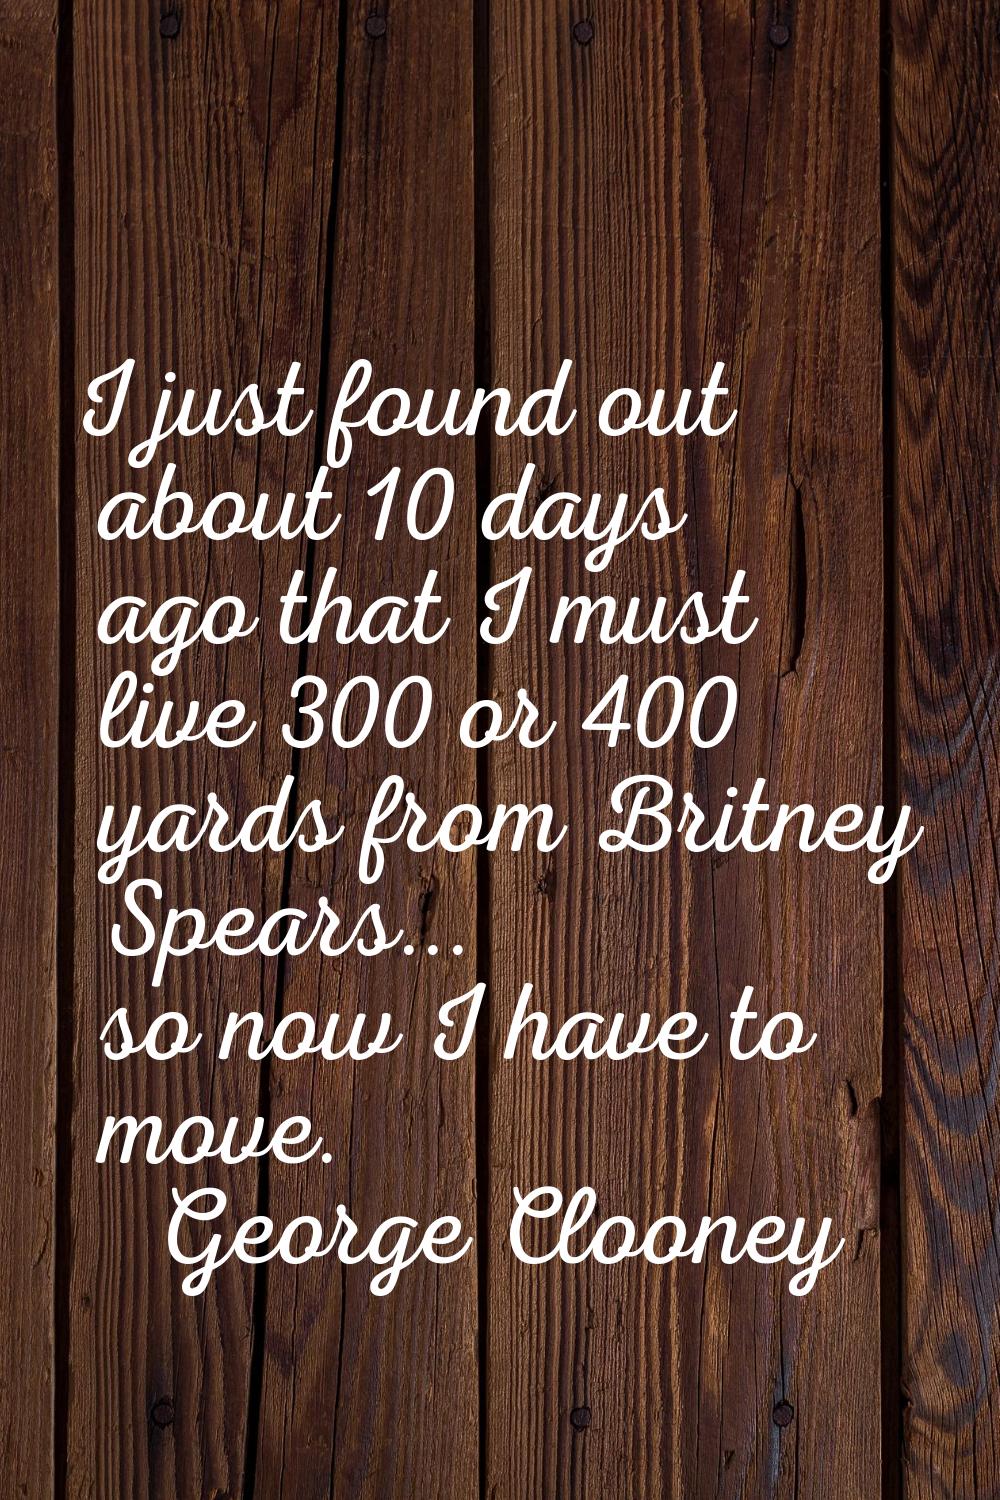 I just found out about 10 days ago that I must live 300 or 400 yards from Britney Spears... so now 